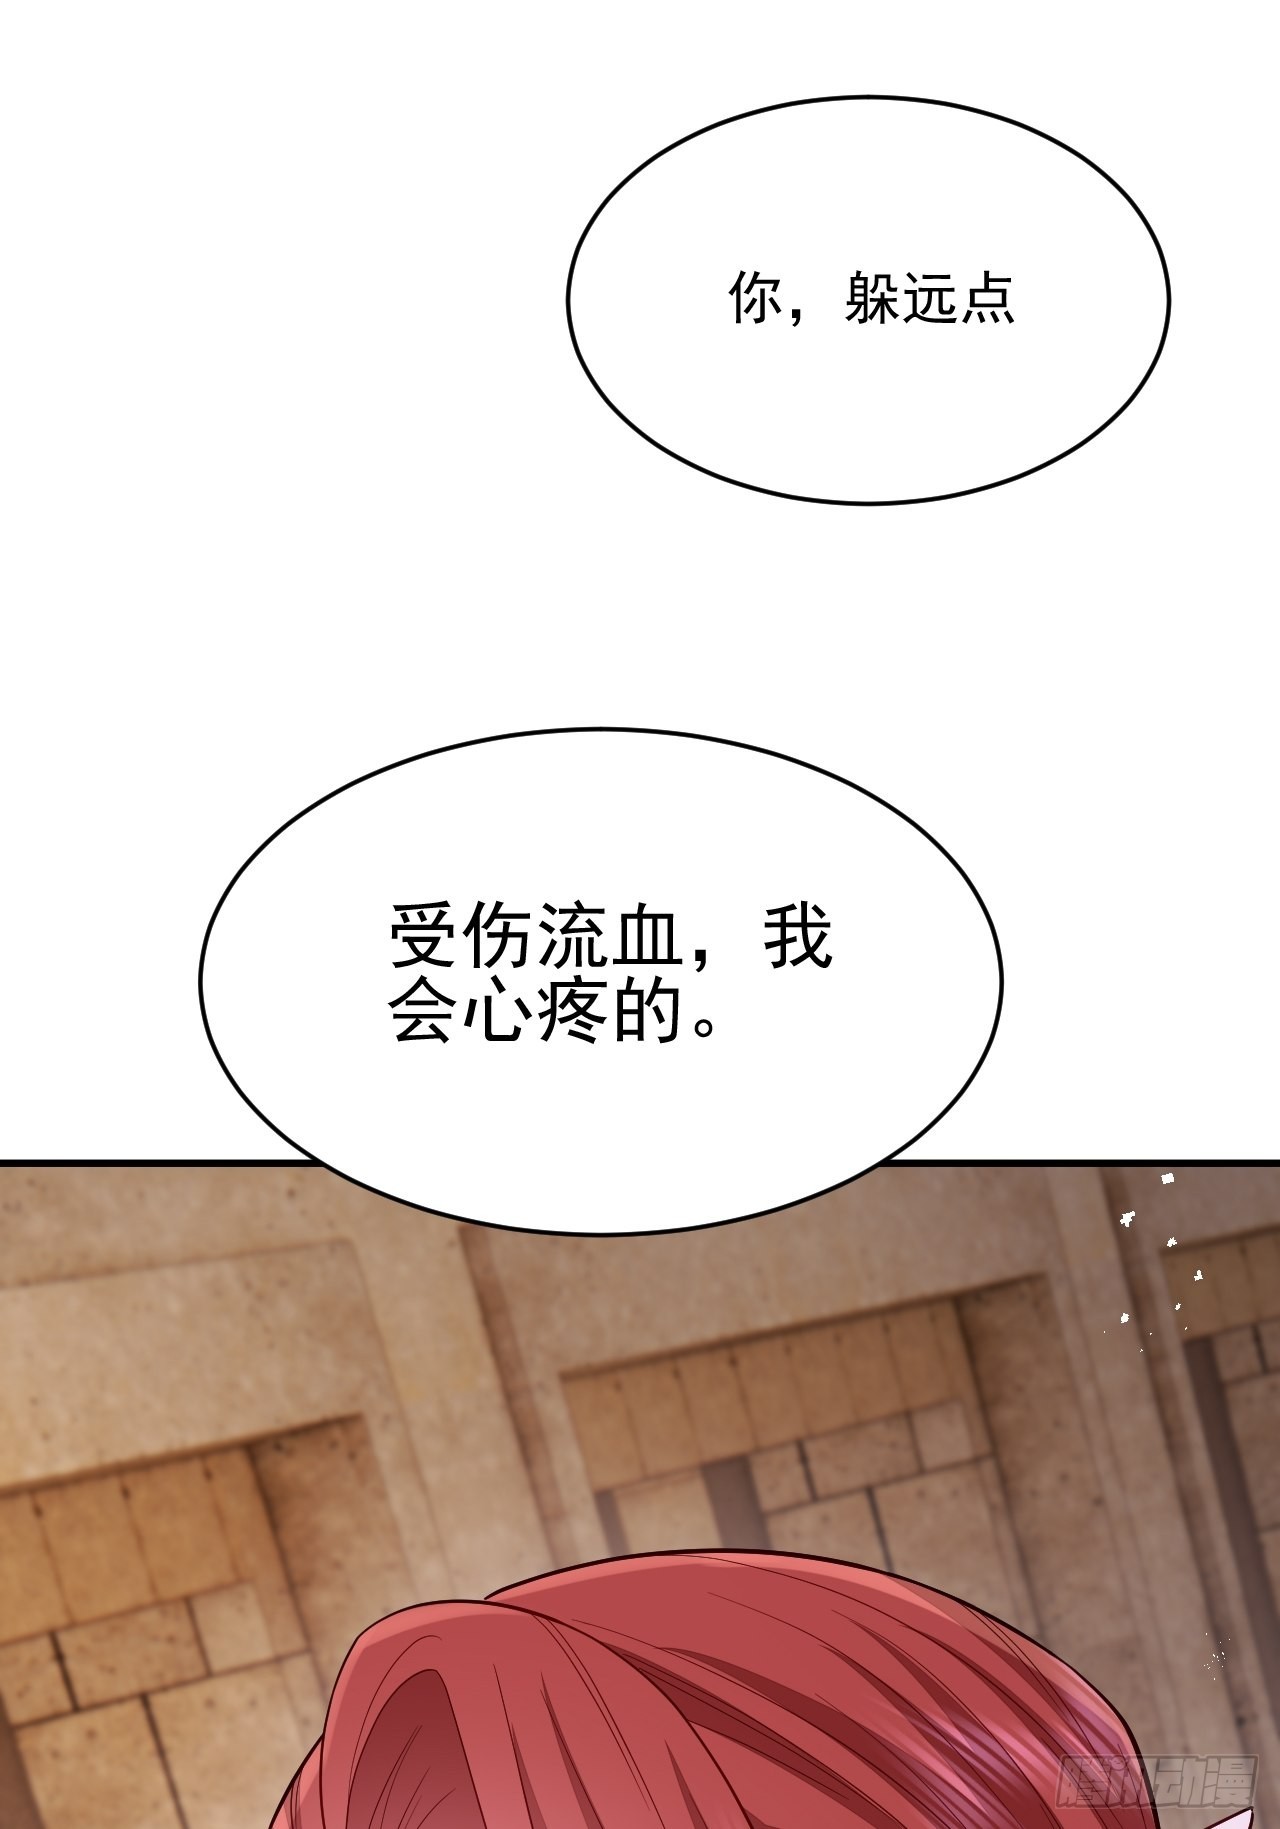 無常4843號 - 第36話(1/2) - 6